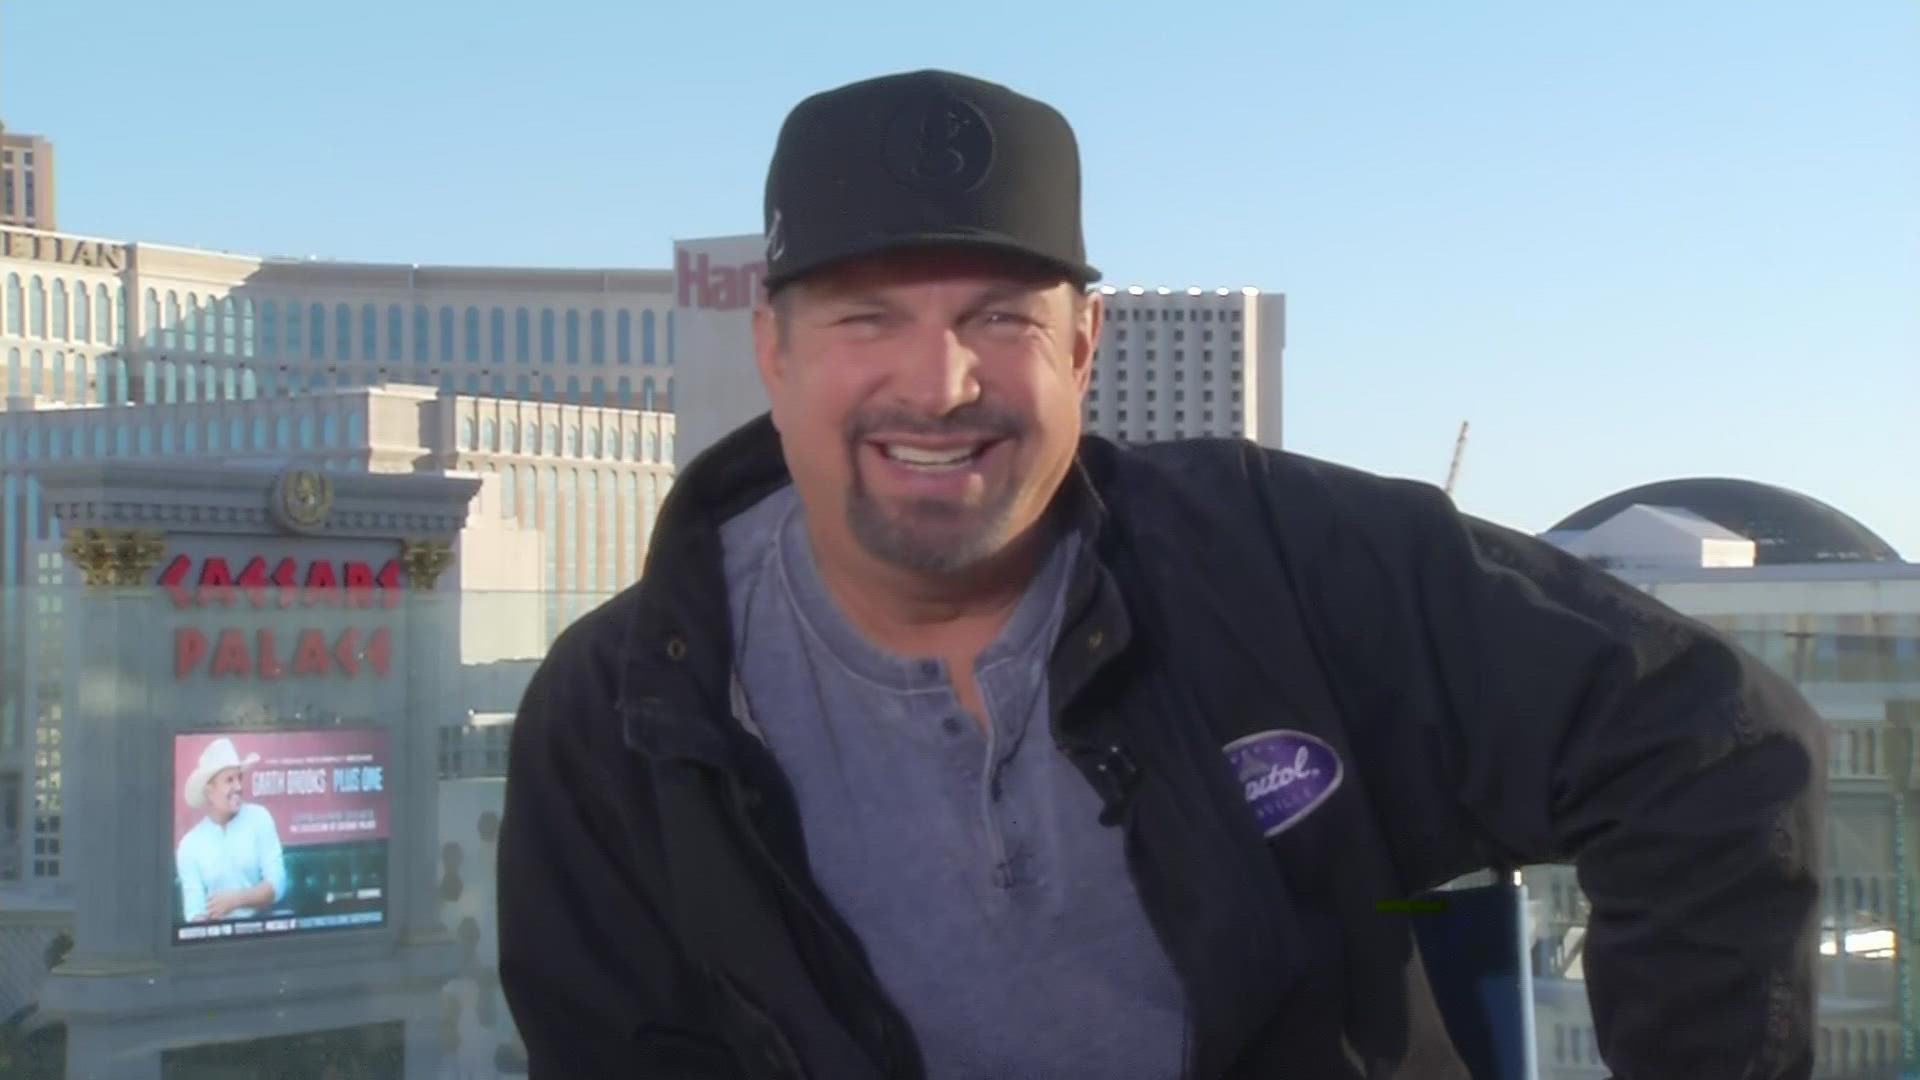 Country music legend Garth Brooks chats with 9NEWS mornings about his recently announced residency at The Colosseum at Caesars Palace next spring.